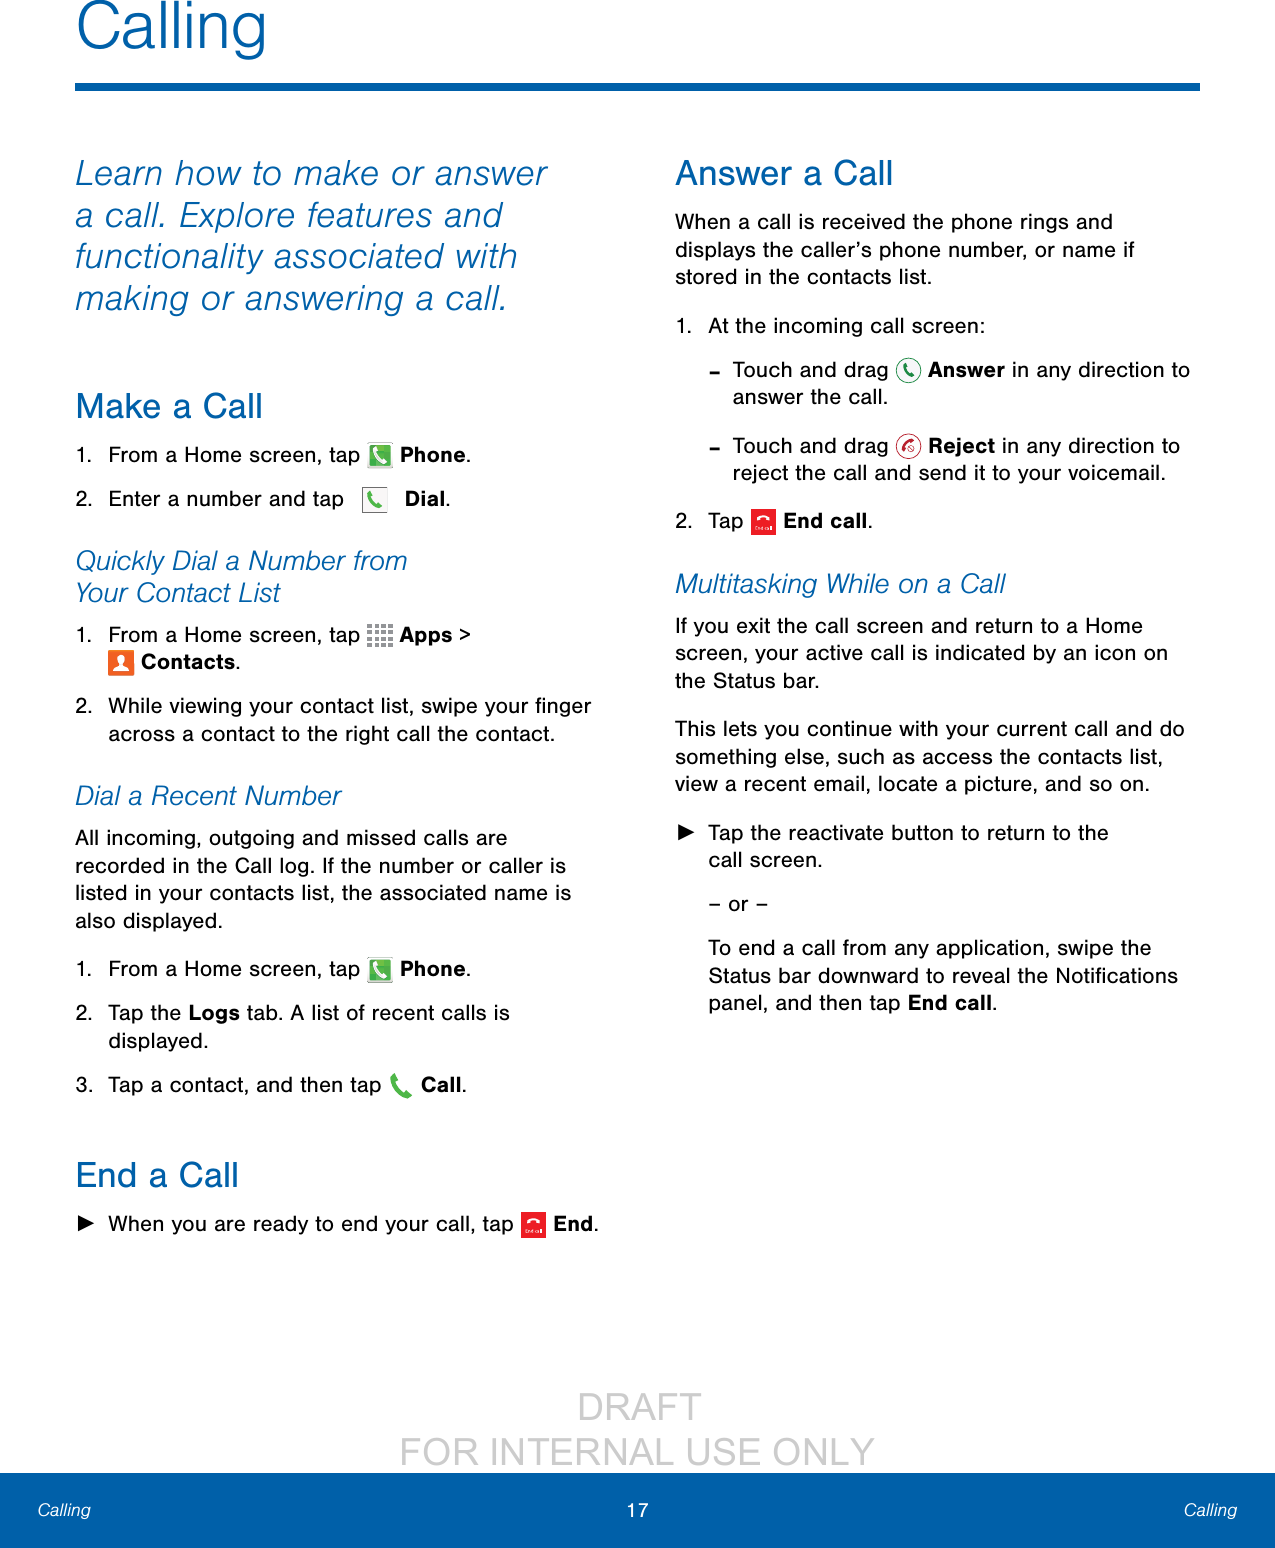                  DRAFT FOR INTERNAL USE ONLY17 CallingCallingCallingLearn how to make or answer a call. Explore features and functionality associated with making or answering a call.Make a Call1.  From a Home screen, tap  Phone.2.  Enter a number and tap  Dial.Quickly Dial a Number from YourContactList1.  From a Home screen, tap   Apps &gt; Contacts.2.  While viewing your contact list, swipe your ﬁnger across a contact to the right call the contact.Dial a Recent NumberAll incoming, outgoing and missed calls are recorded in the Call log. If the number or caller is listed in your contacts list, the associated name is also displayed. 1.  From a Home screen, tap   Phone.2.  Tap the Logs tab. A list of recent calls is displayed.3.  Tap a contact, and then tap   Call.End a Call ►When you are ready to end your call, tap  End.Answer a CallWhen a call is received the phone rings and displays the caller’s phone number, or name if stored in the contacts list.1.  At the incoming call screen: -Touch and drag   Answer in any direction to answer the call. -Touch and drag   Reject in any direction to reject the call and send it to your voicemail.2.  Tap  Endcall.Multitasking While on a CallIf you exit the call screen and return to a Home screen, your active call is indicated by an icon on the Status bar.This lets you continue with your current call and do something else, such as access the contacts list, view a recent email, locate a picture, and so on. ►Tap the reactivate button to return to the callscreen.– or –To end a call from any application, swipe the Status bar downward to reveal the Notiﬁcations panel, and then tap End call. 